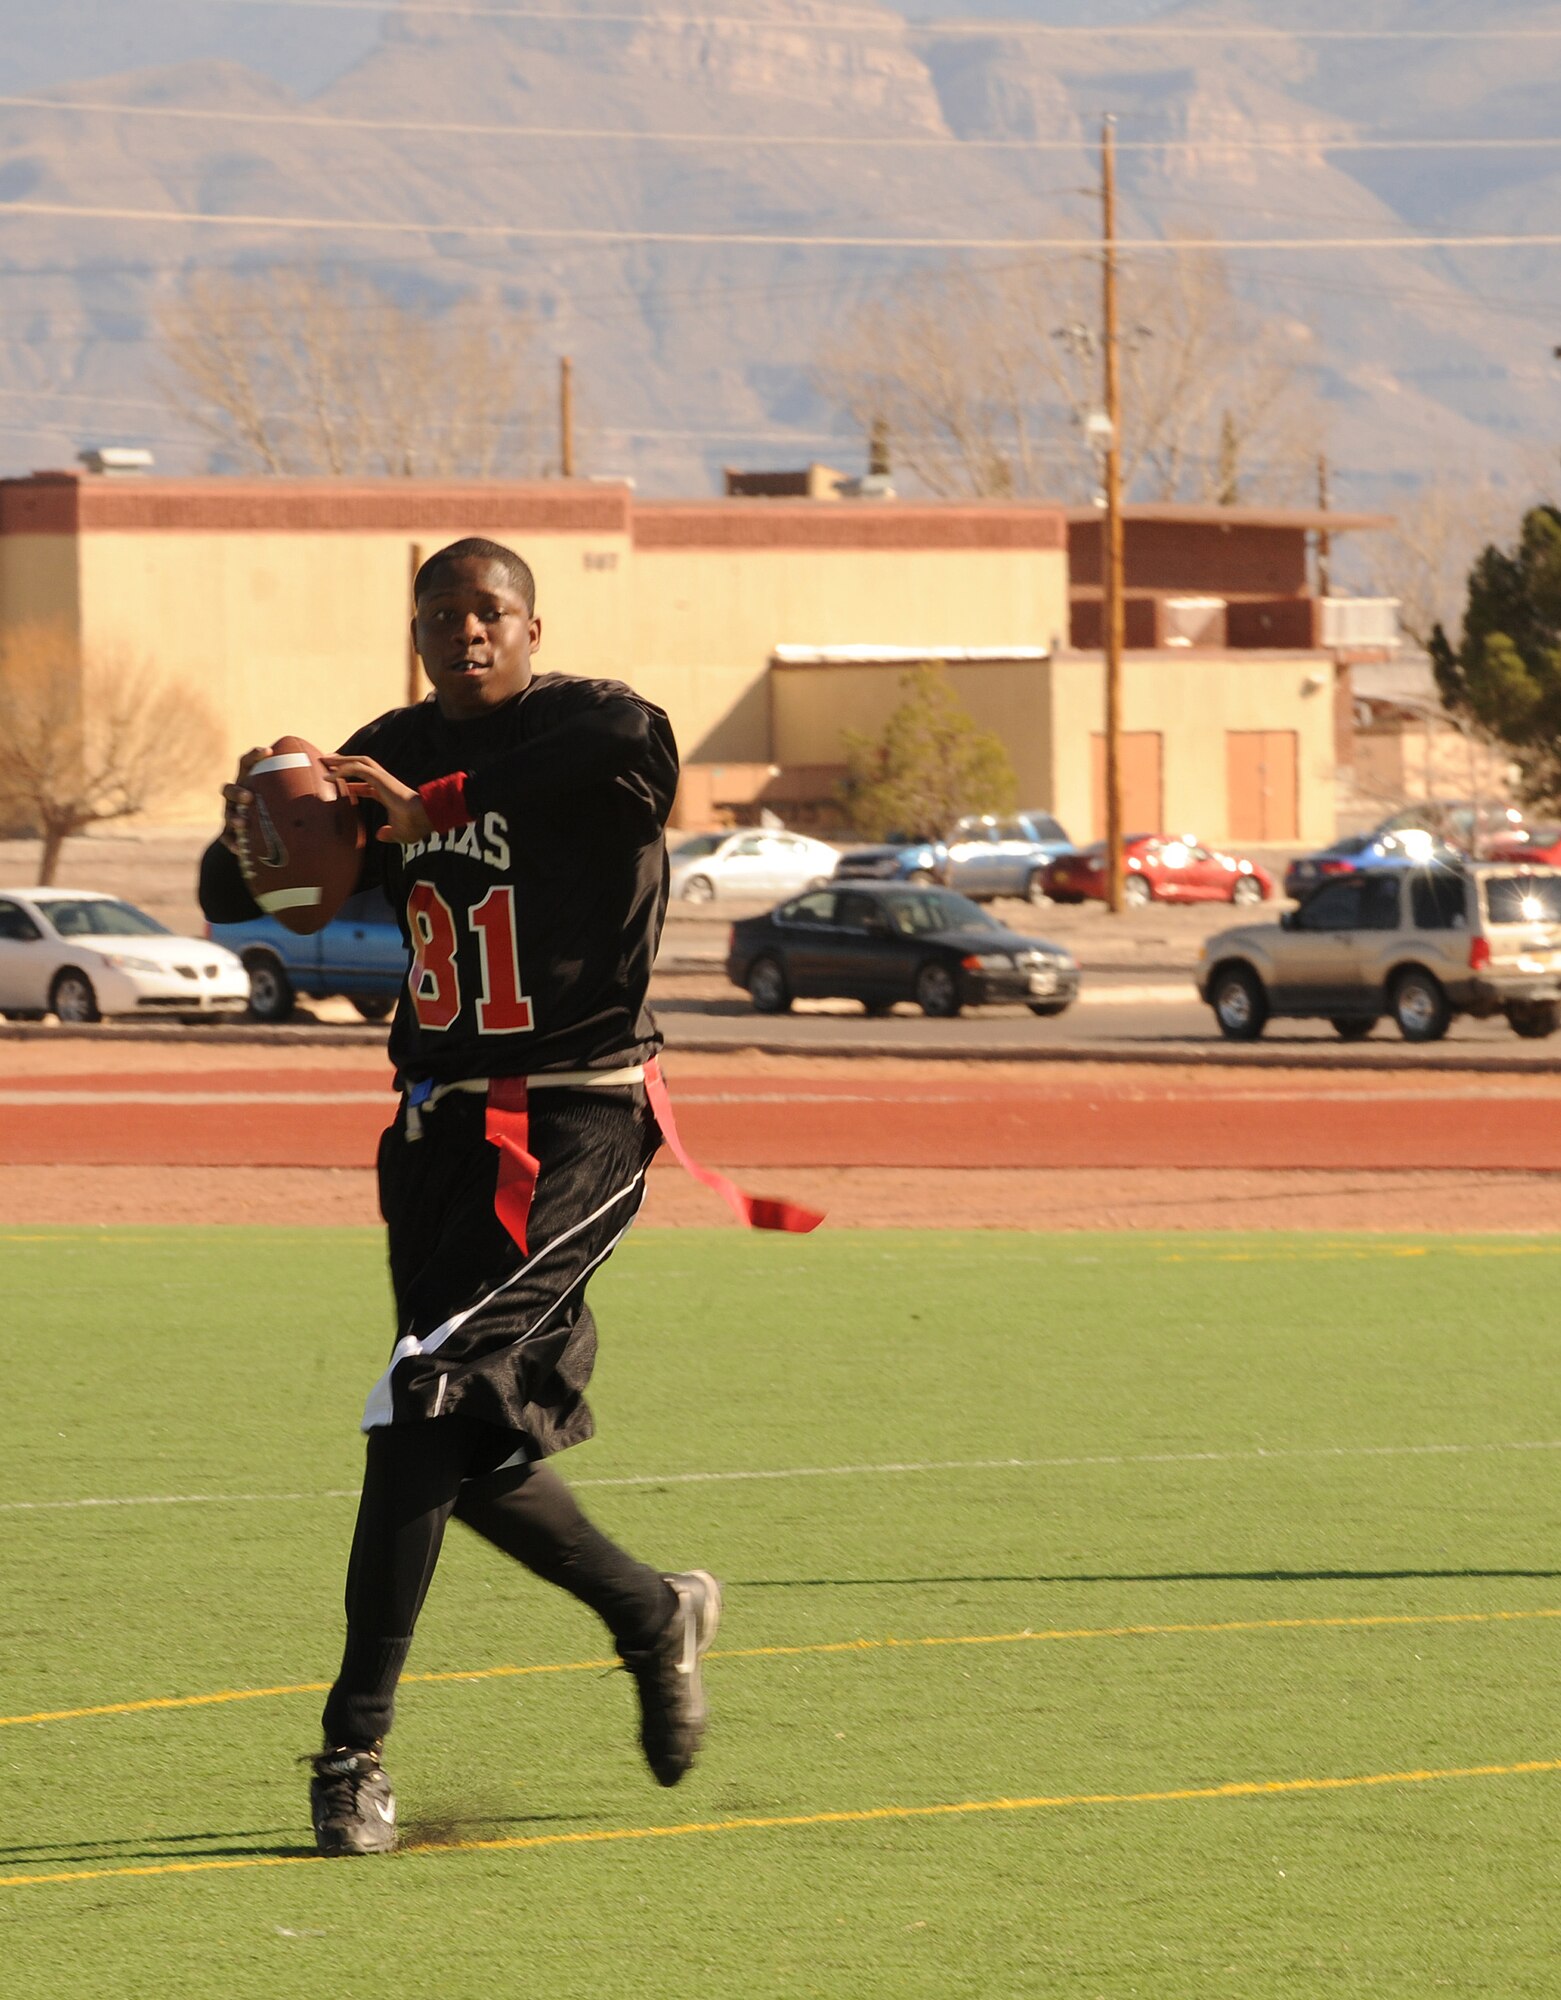 HOLLOMAN AIR FORCE BASE, N.M. -- Ernest Fishburne, quarterback for the 49th Aircraft Maintenance Squadron, drops back to look for an open receiver during the Flag Football Championship game Dec. 19. The 49th AMXS were seeded second out of 11 teams in the tournament, but lost the final game by 7 points against the 49th Maintenance Squadron. (U.S. Air Force photo by Airman 1st Class Sondra Escutia)